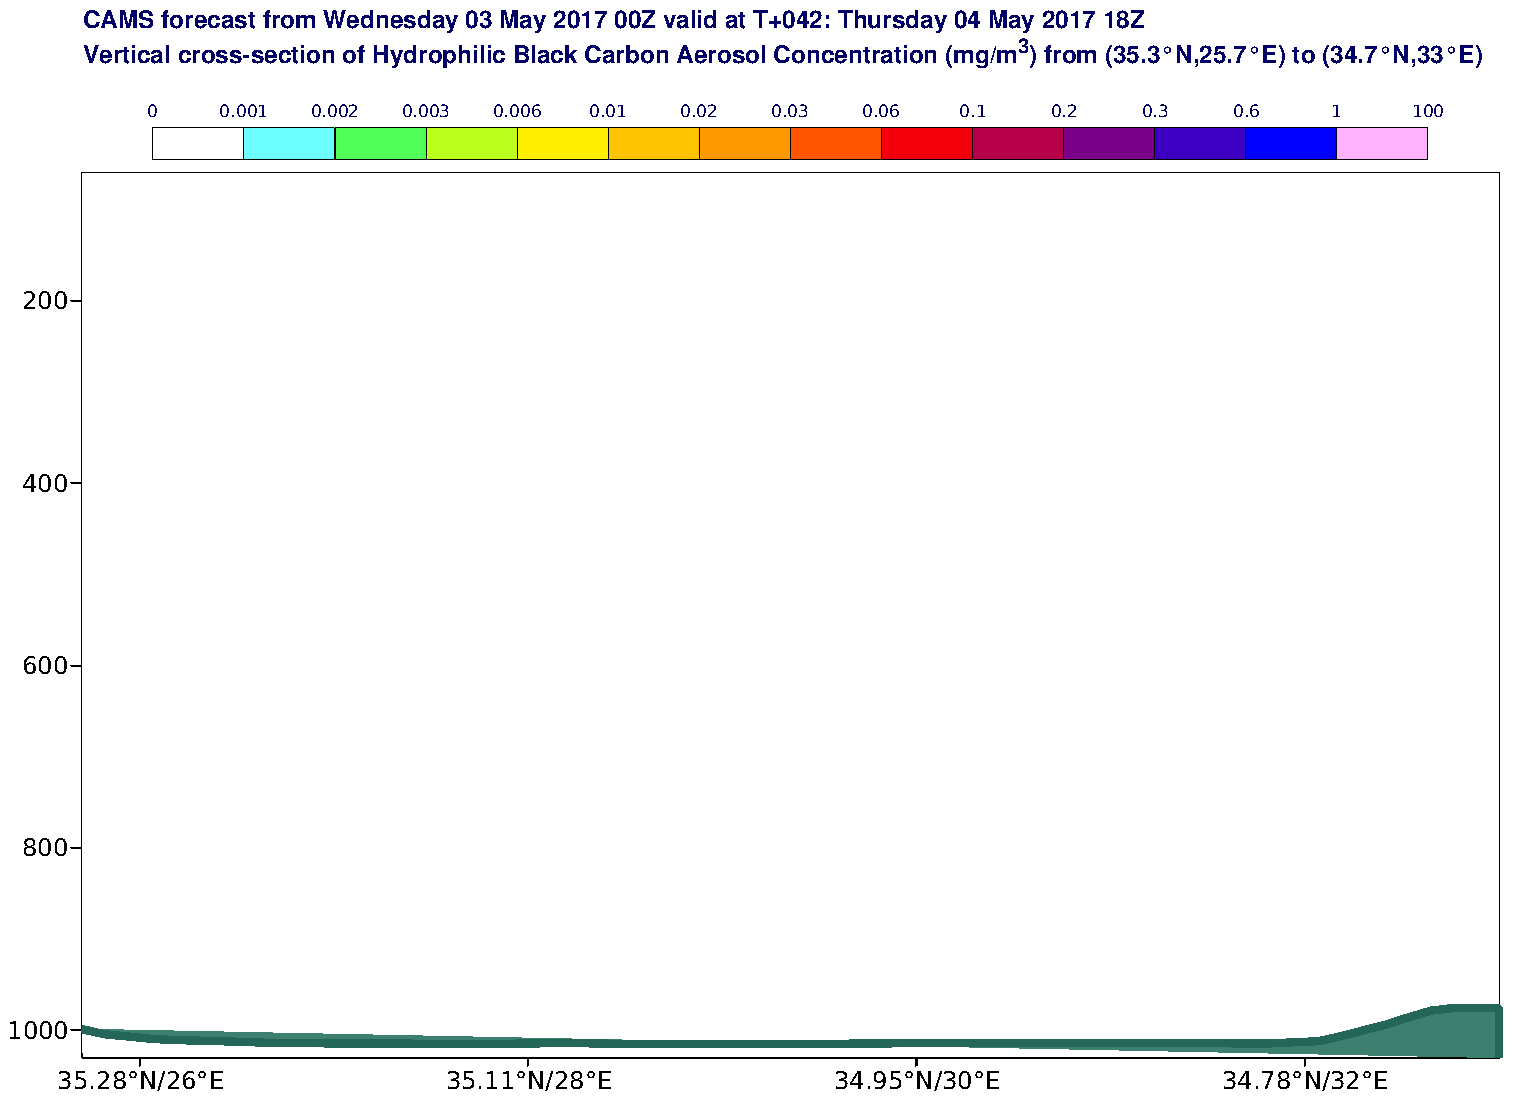 Vertical cross-section of Hydrophilic Black Carbon Aerosol Concentration (mg/m3) valid at T42 - 2017-05-04 18:00